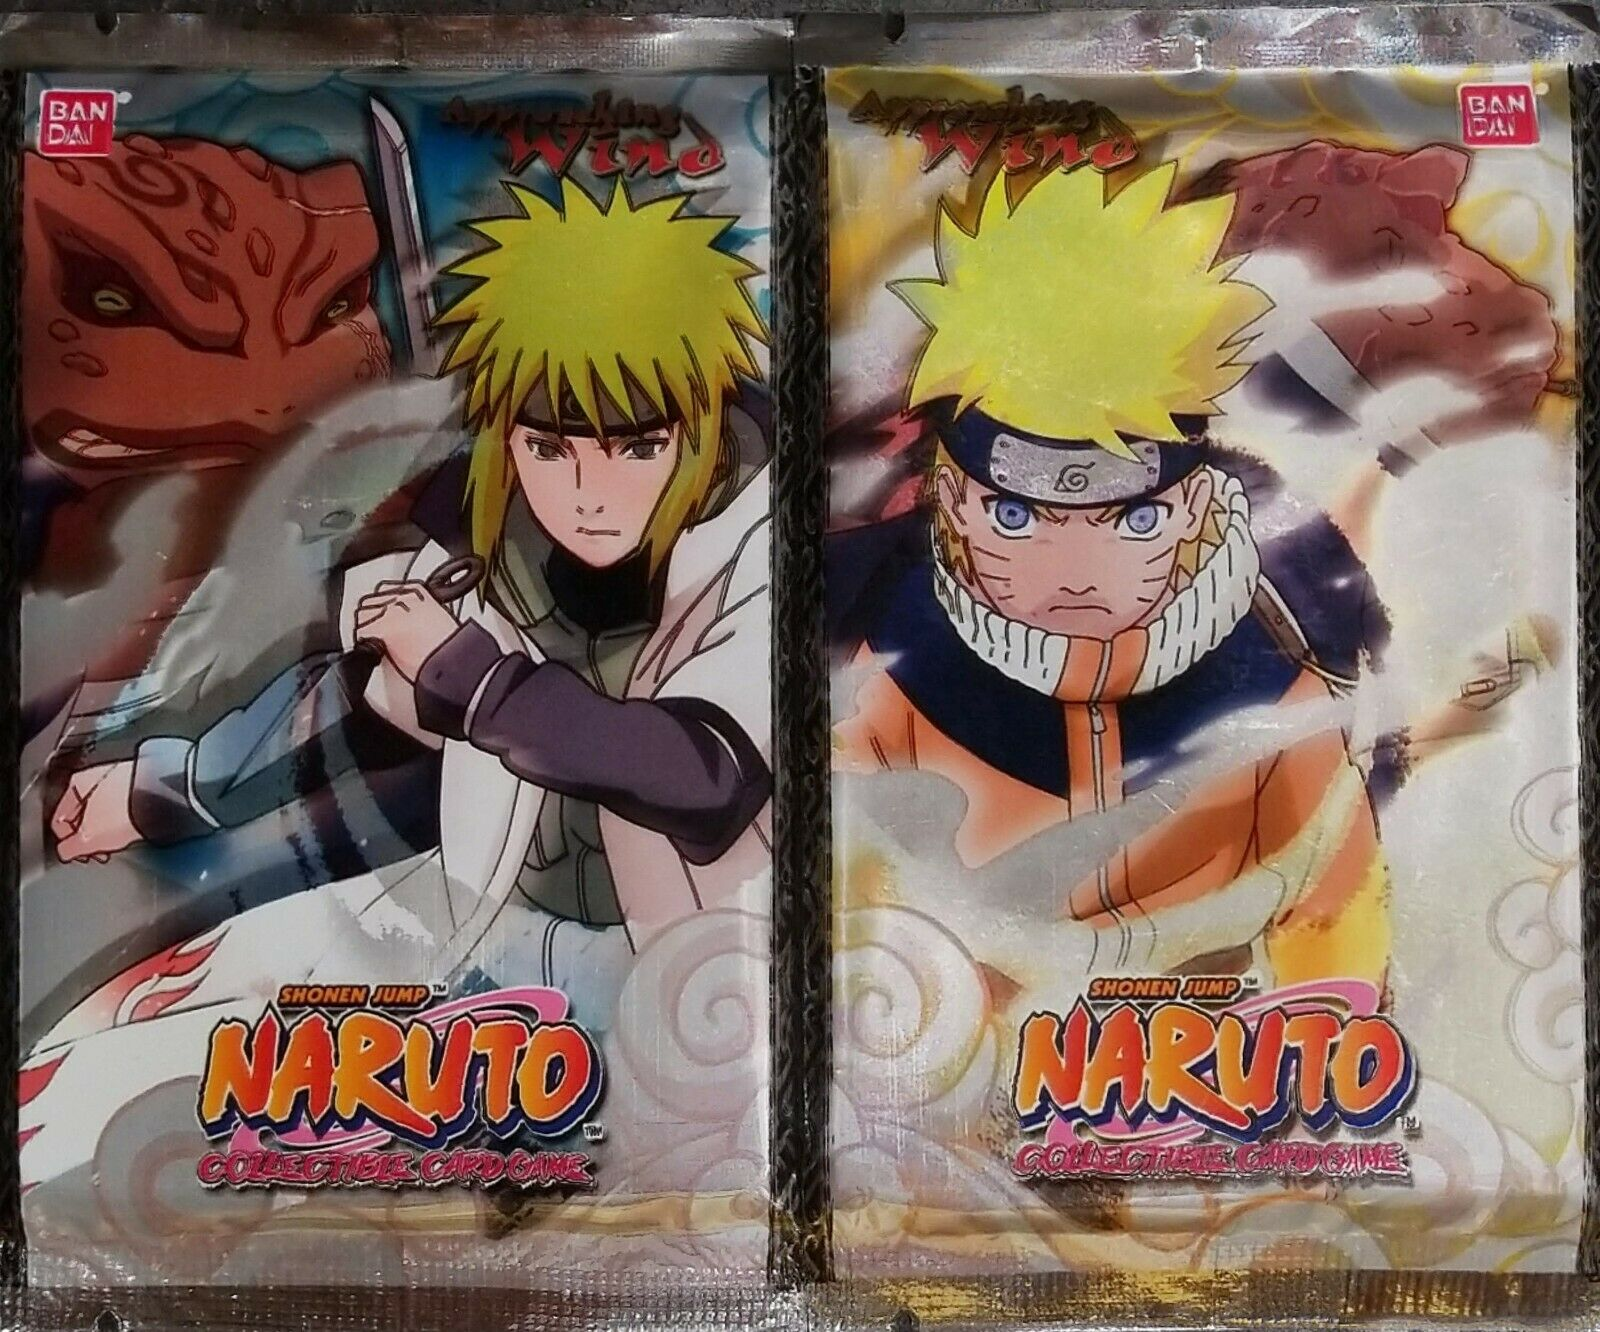 Naruto Approaching Wind Lot of 24 Loose Booster Packs